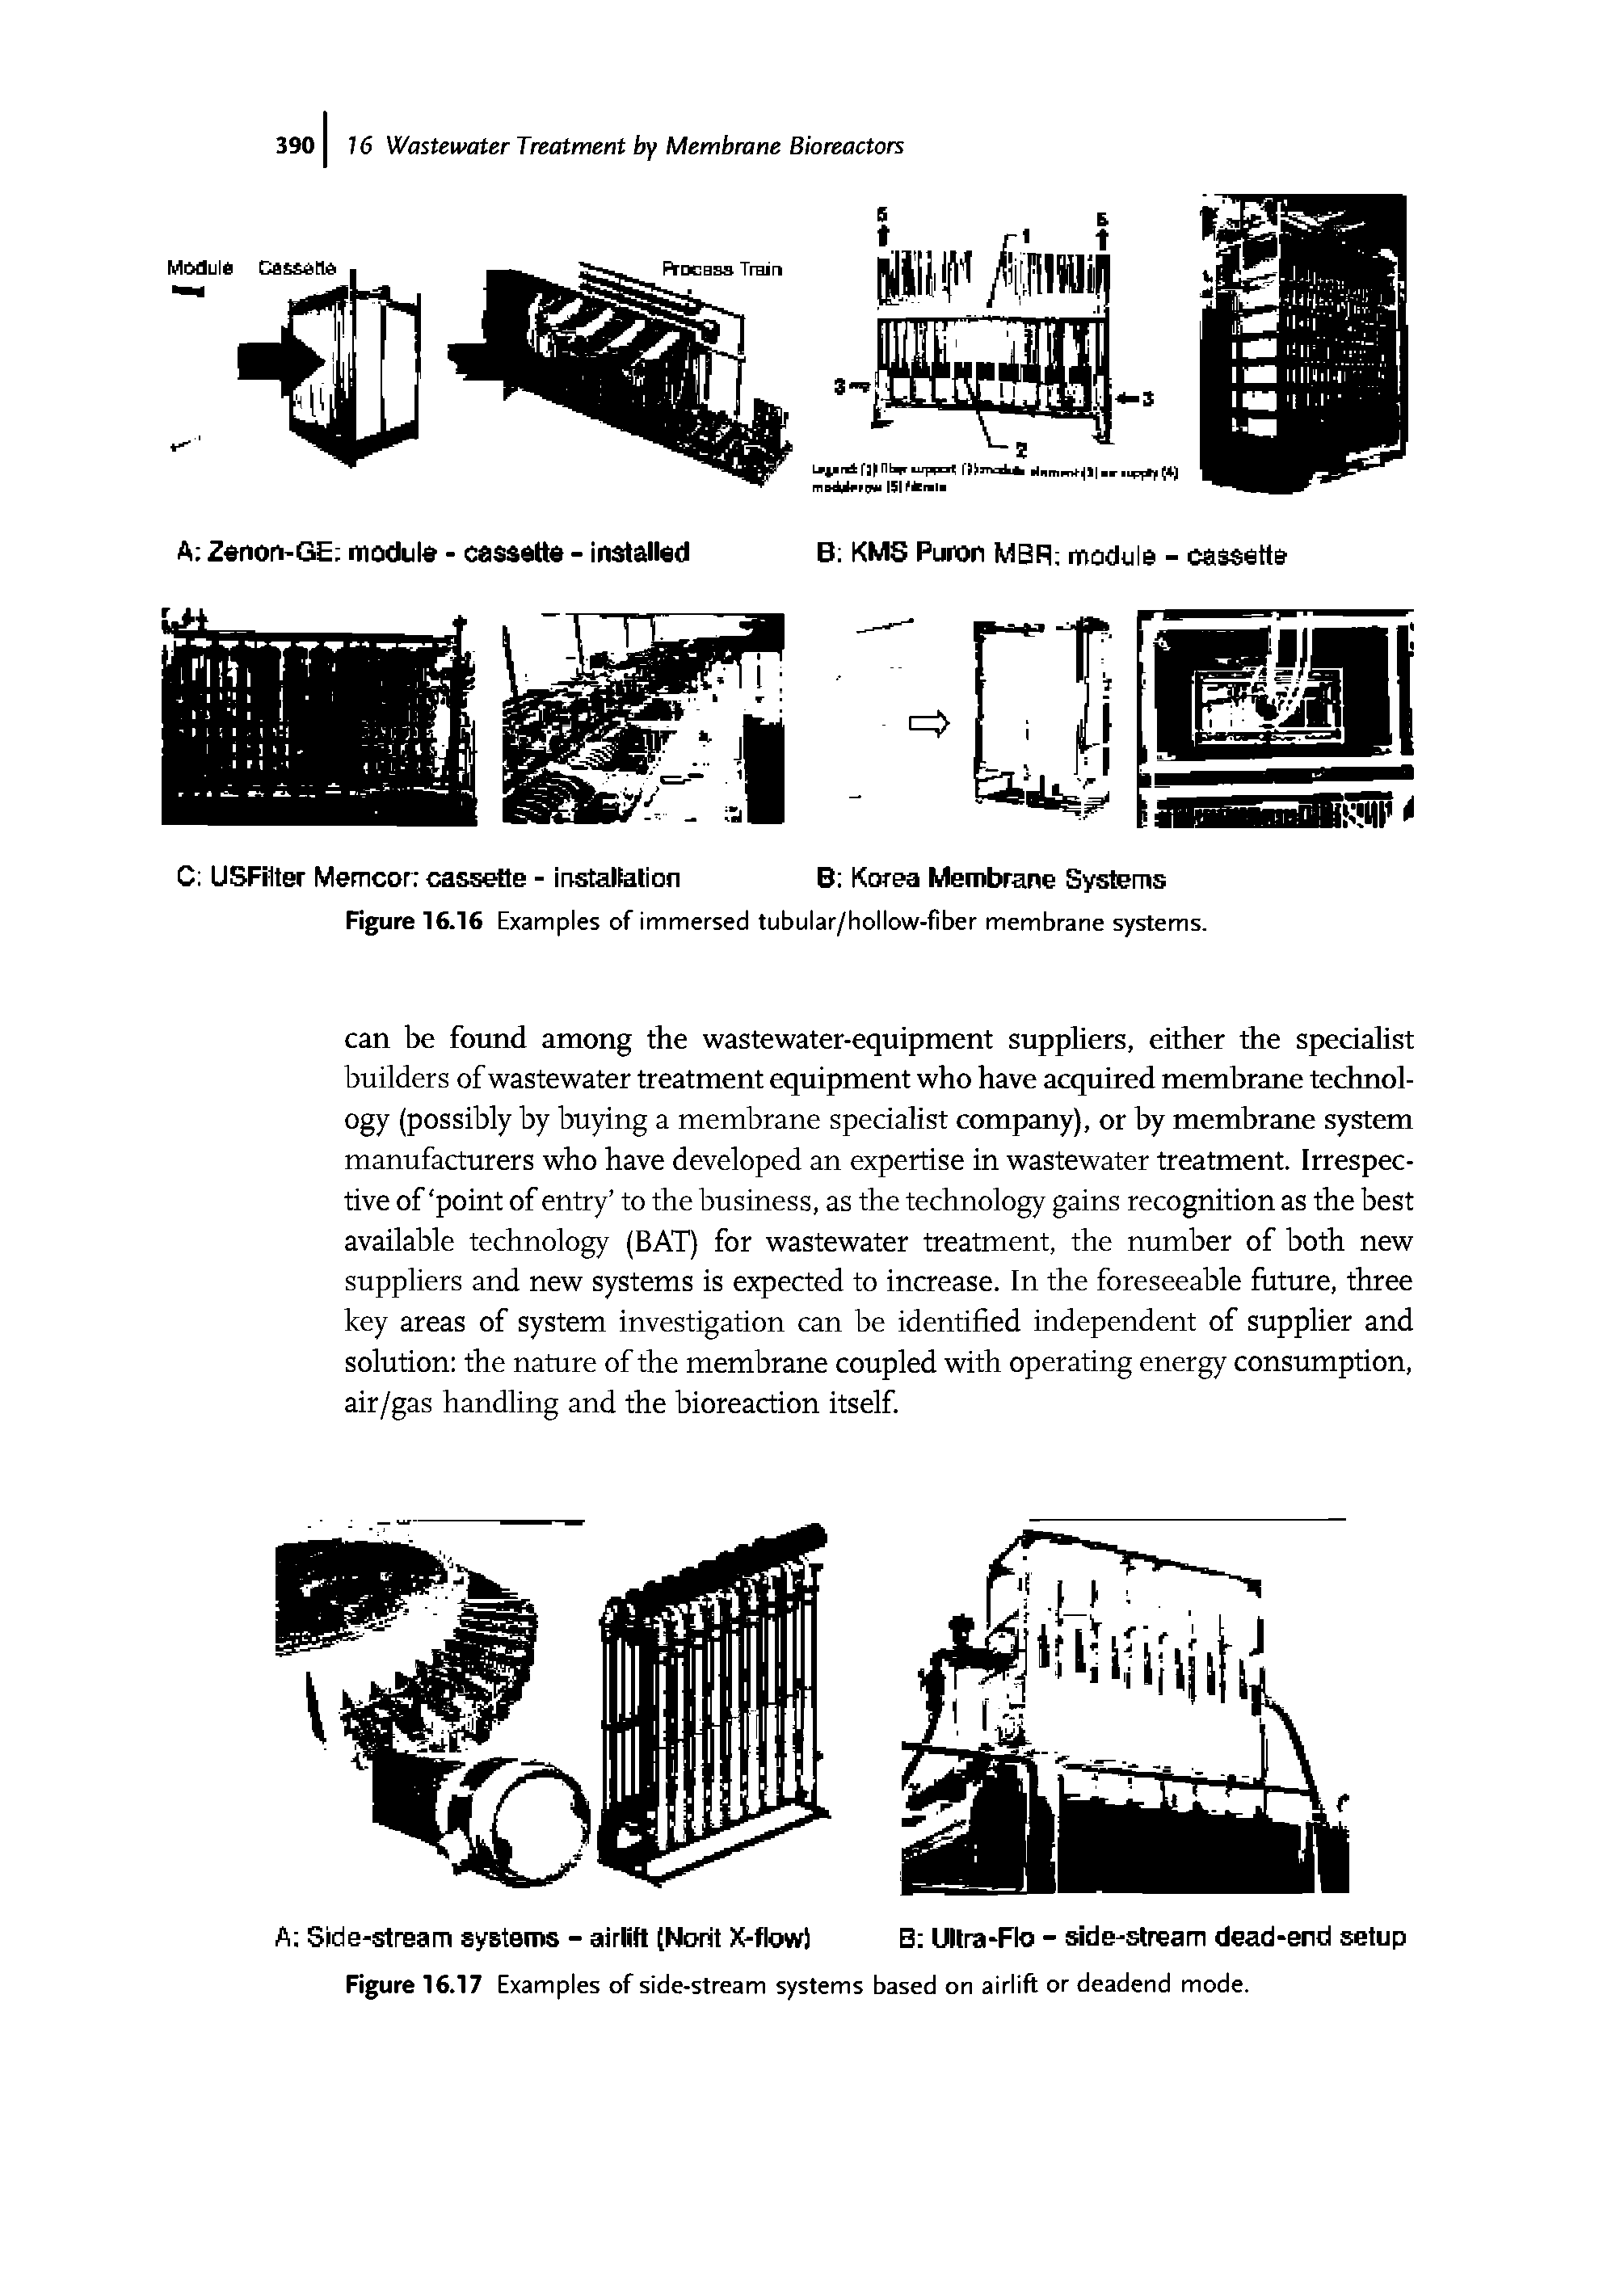 Figure 16.17 Examples of side-stream systems based on airlift or deadend mode.